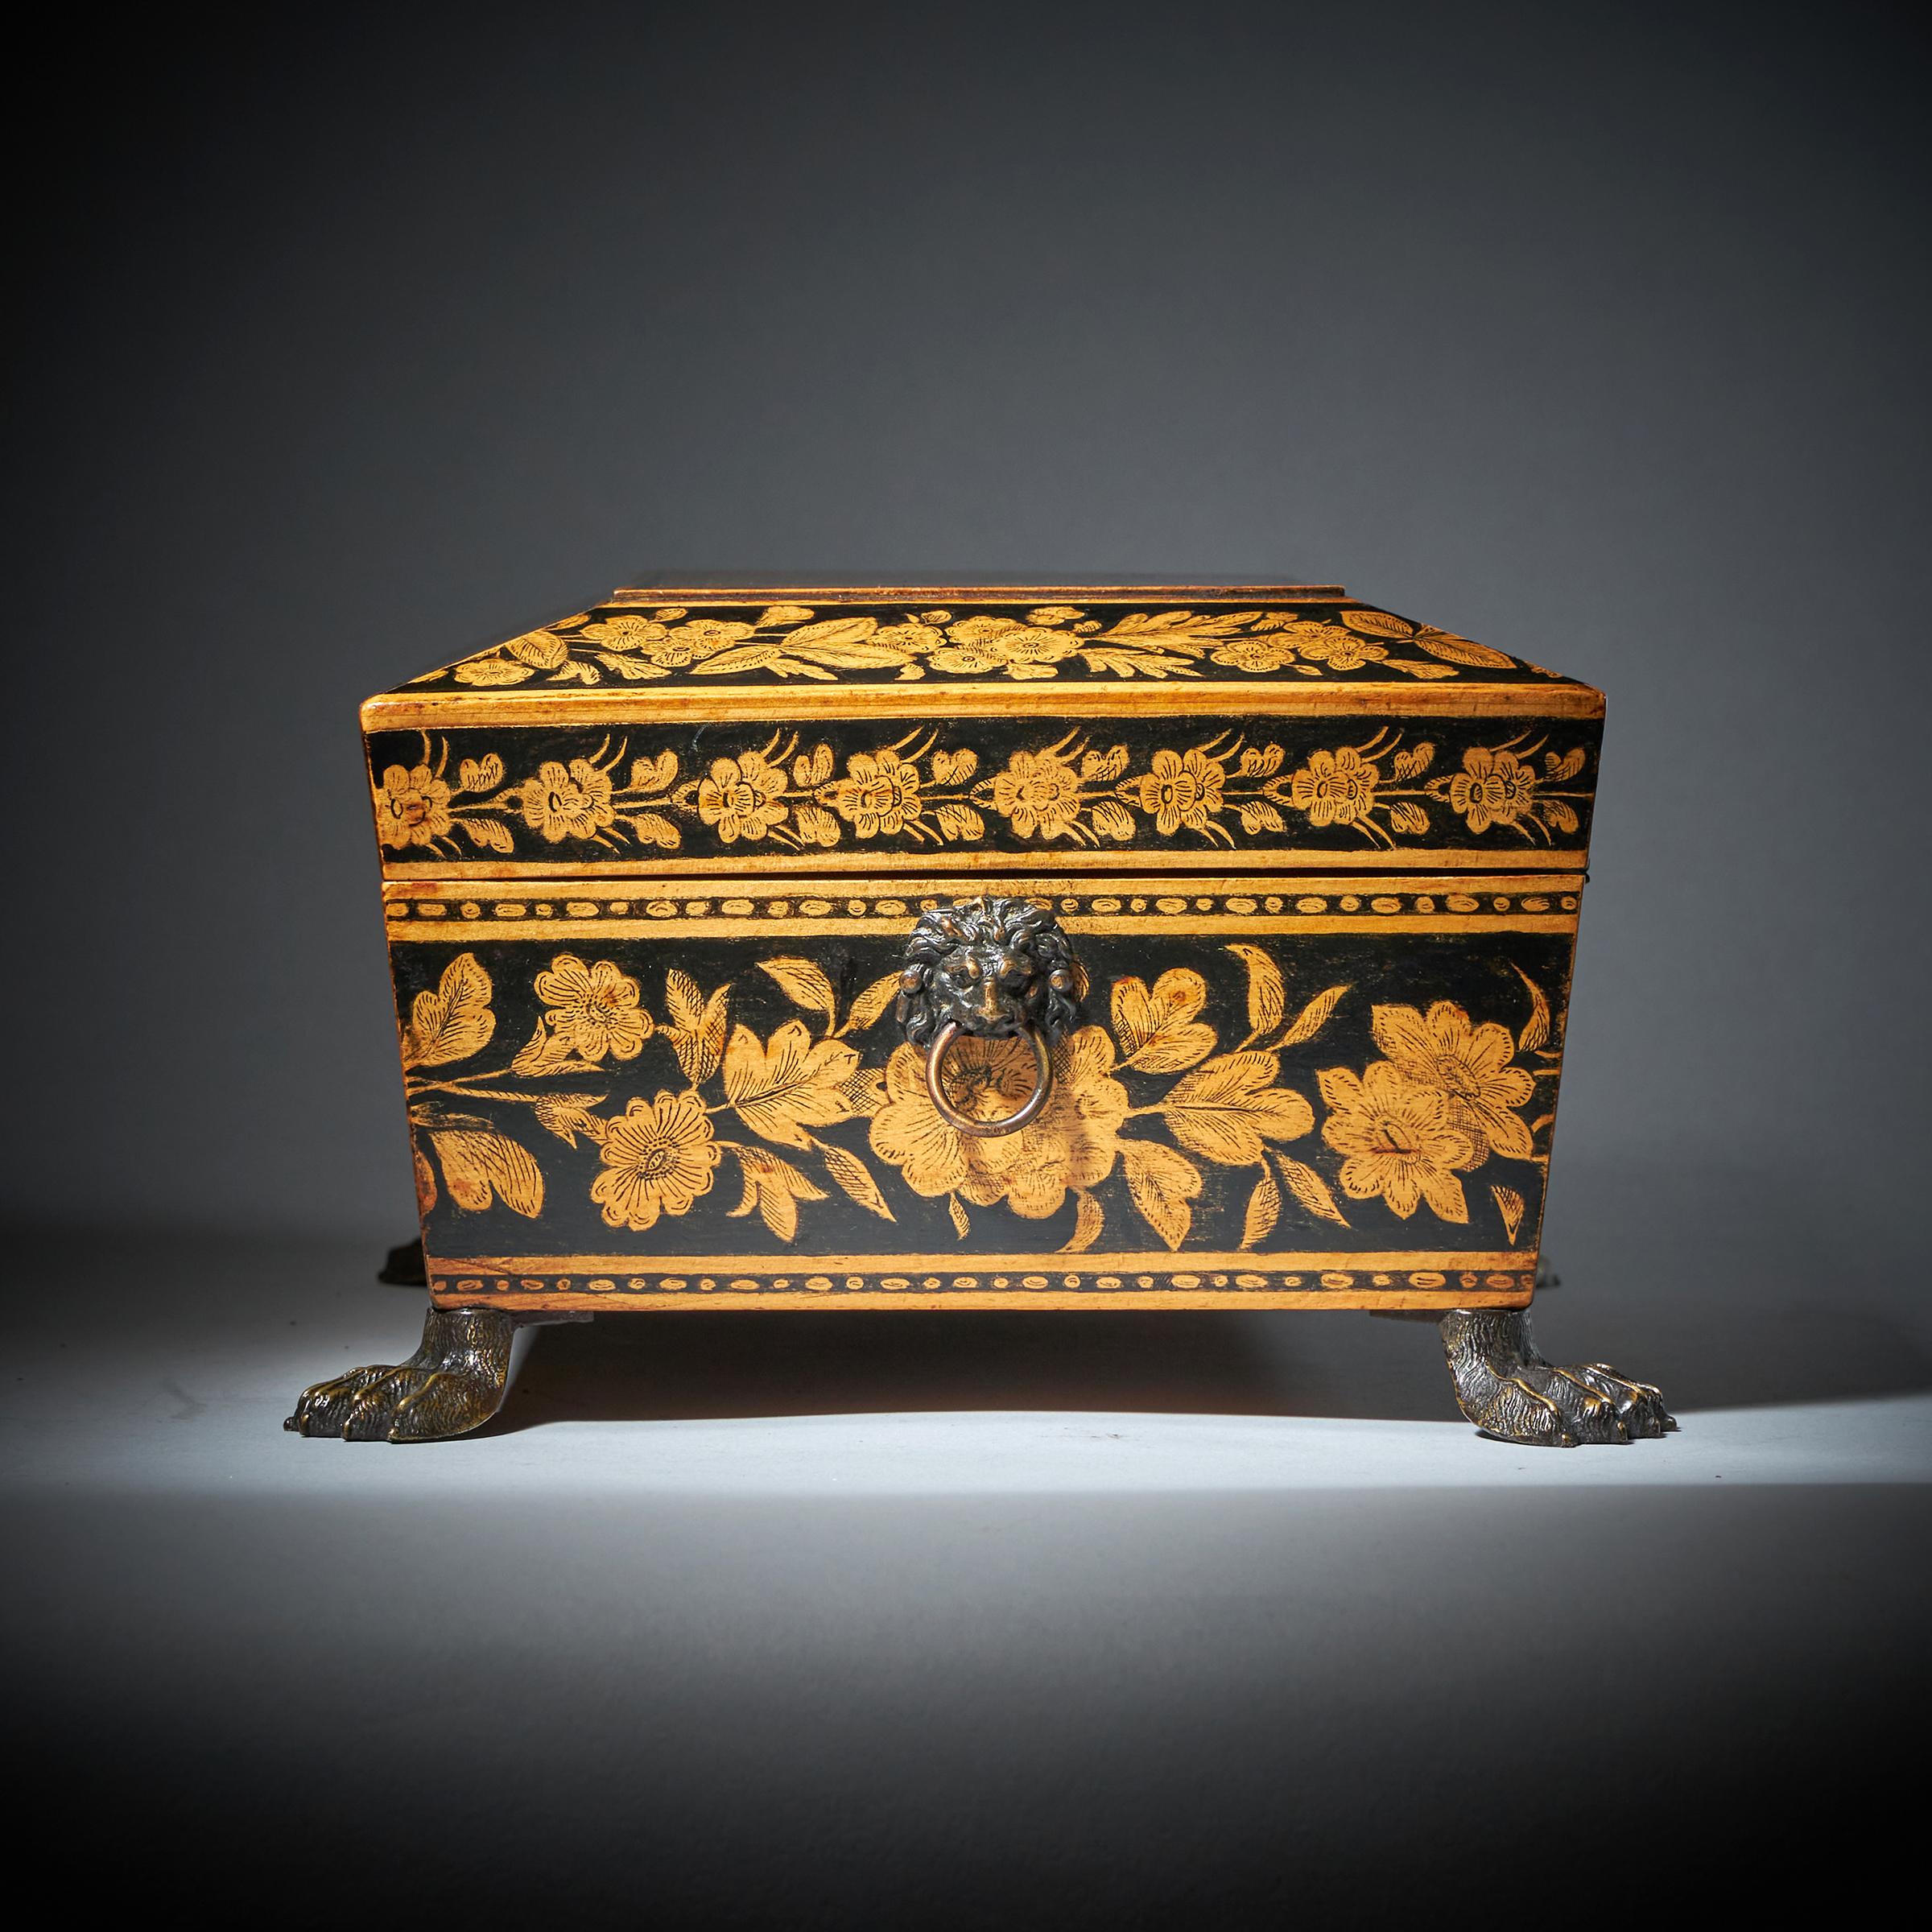 19th Century George III Chinoiserie Brass Mounted Penwork Jewellery Box, Signed E.F 1816 For Sale